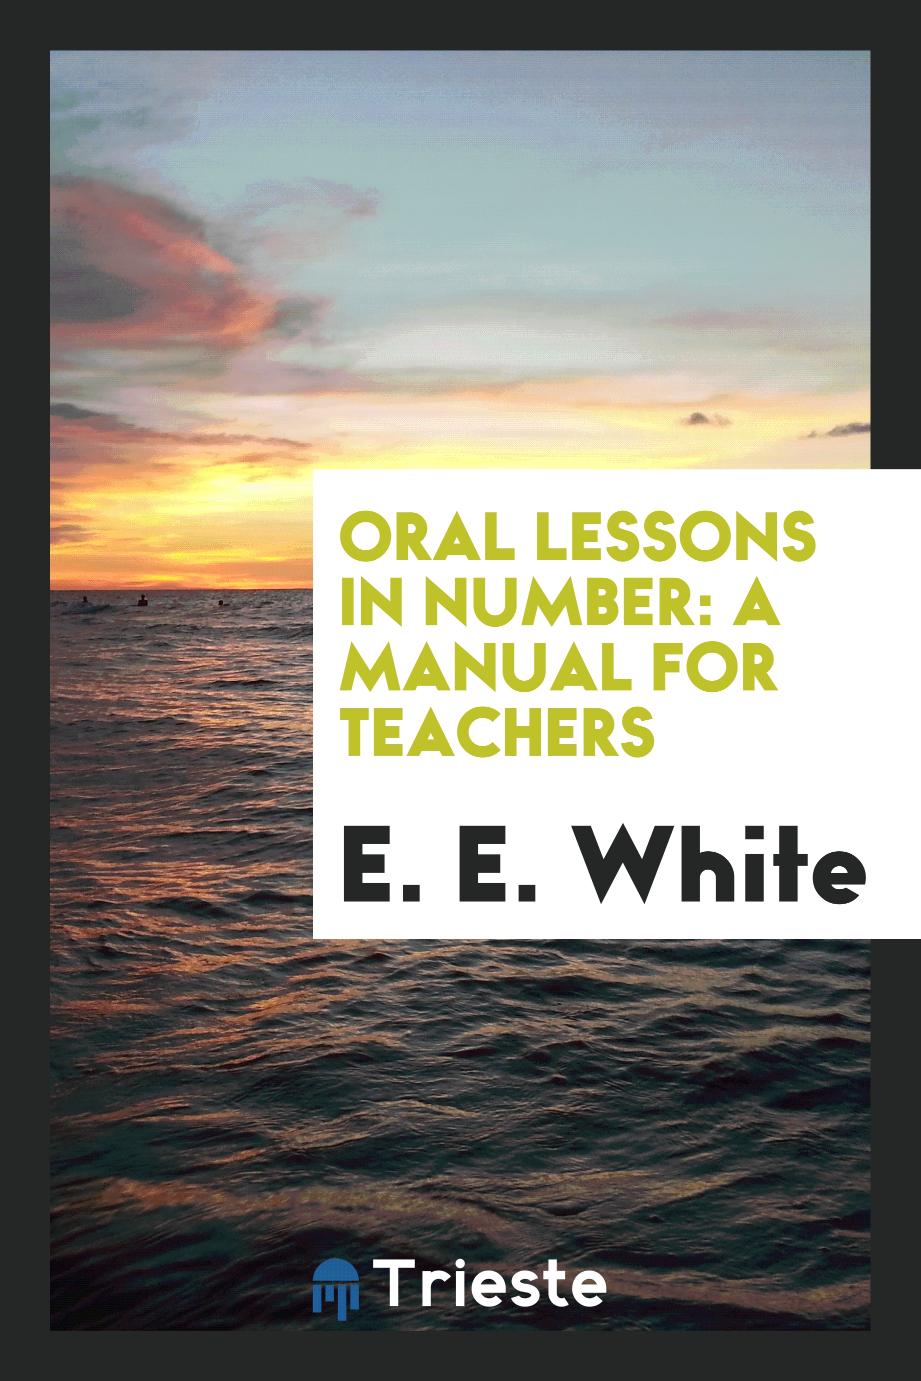 Oral lessons in number: a manual for teachers